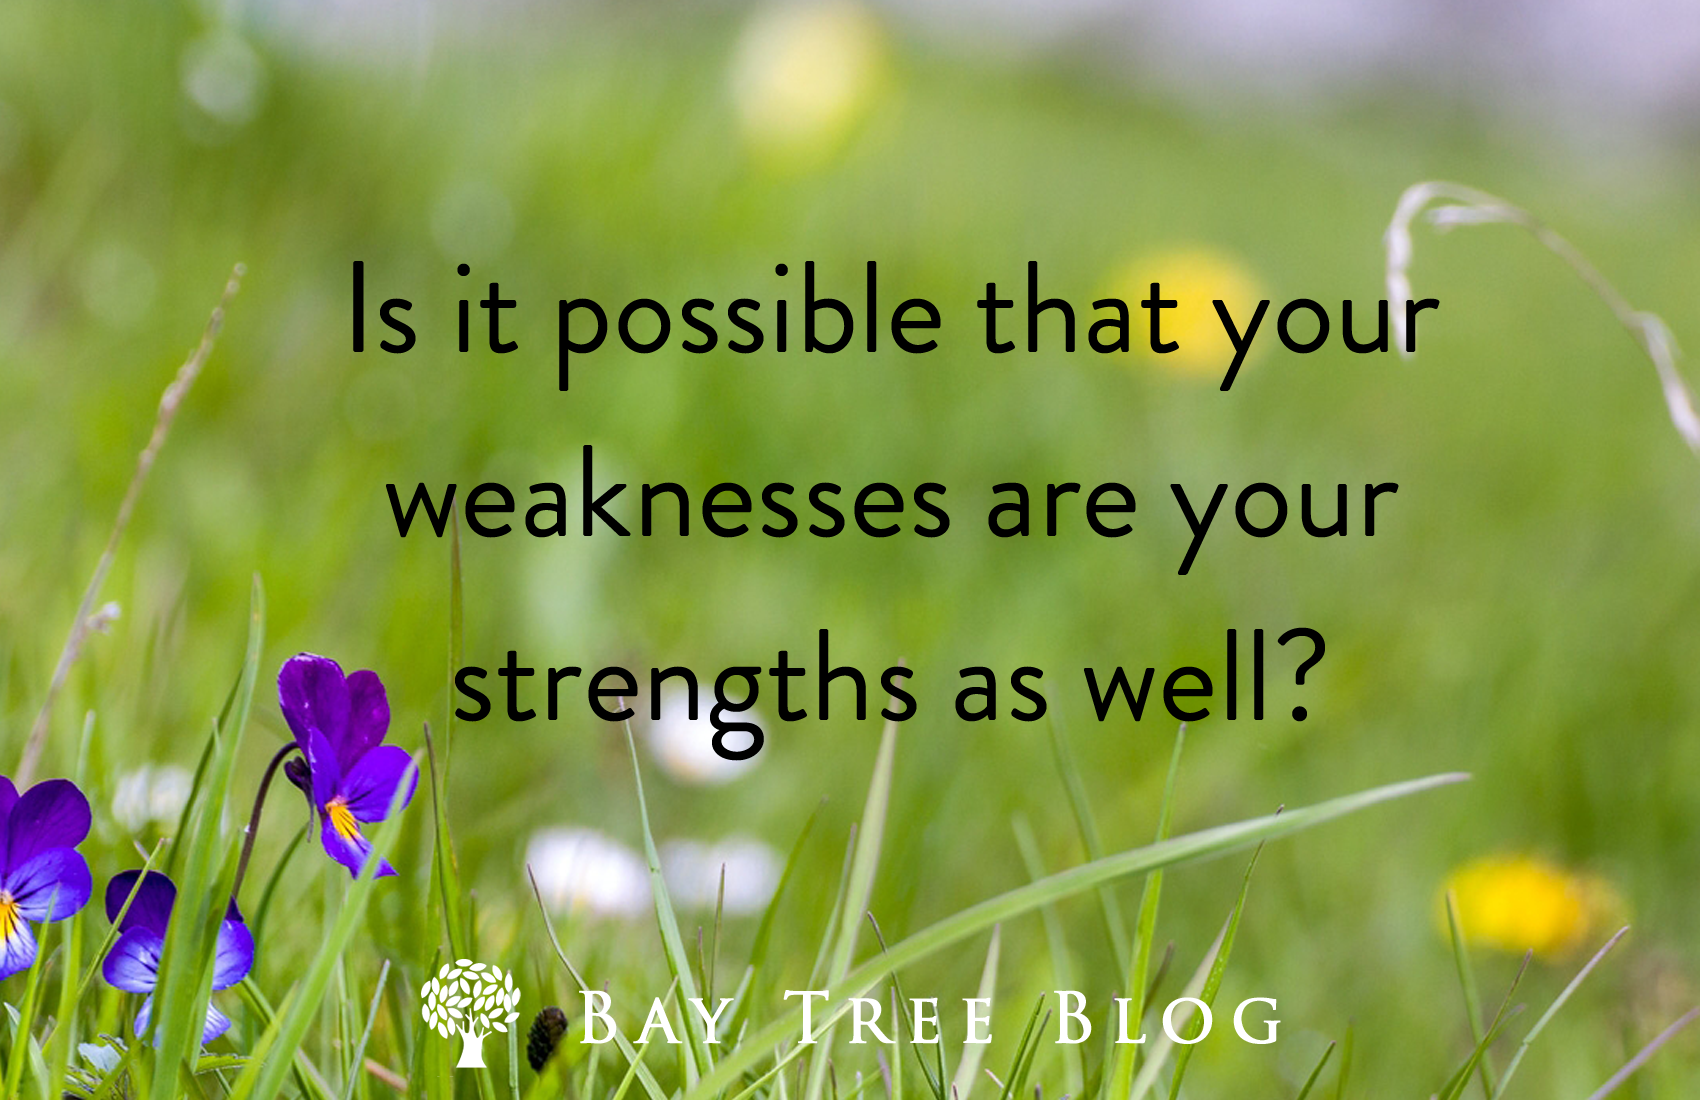 Is it possible that your weaknesses are your strengths as well? BayTreeBlog.com